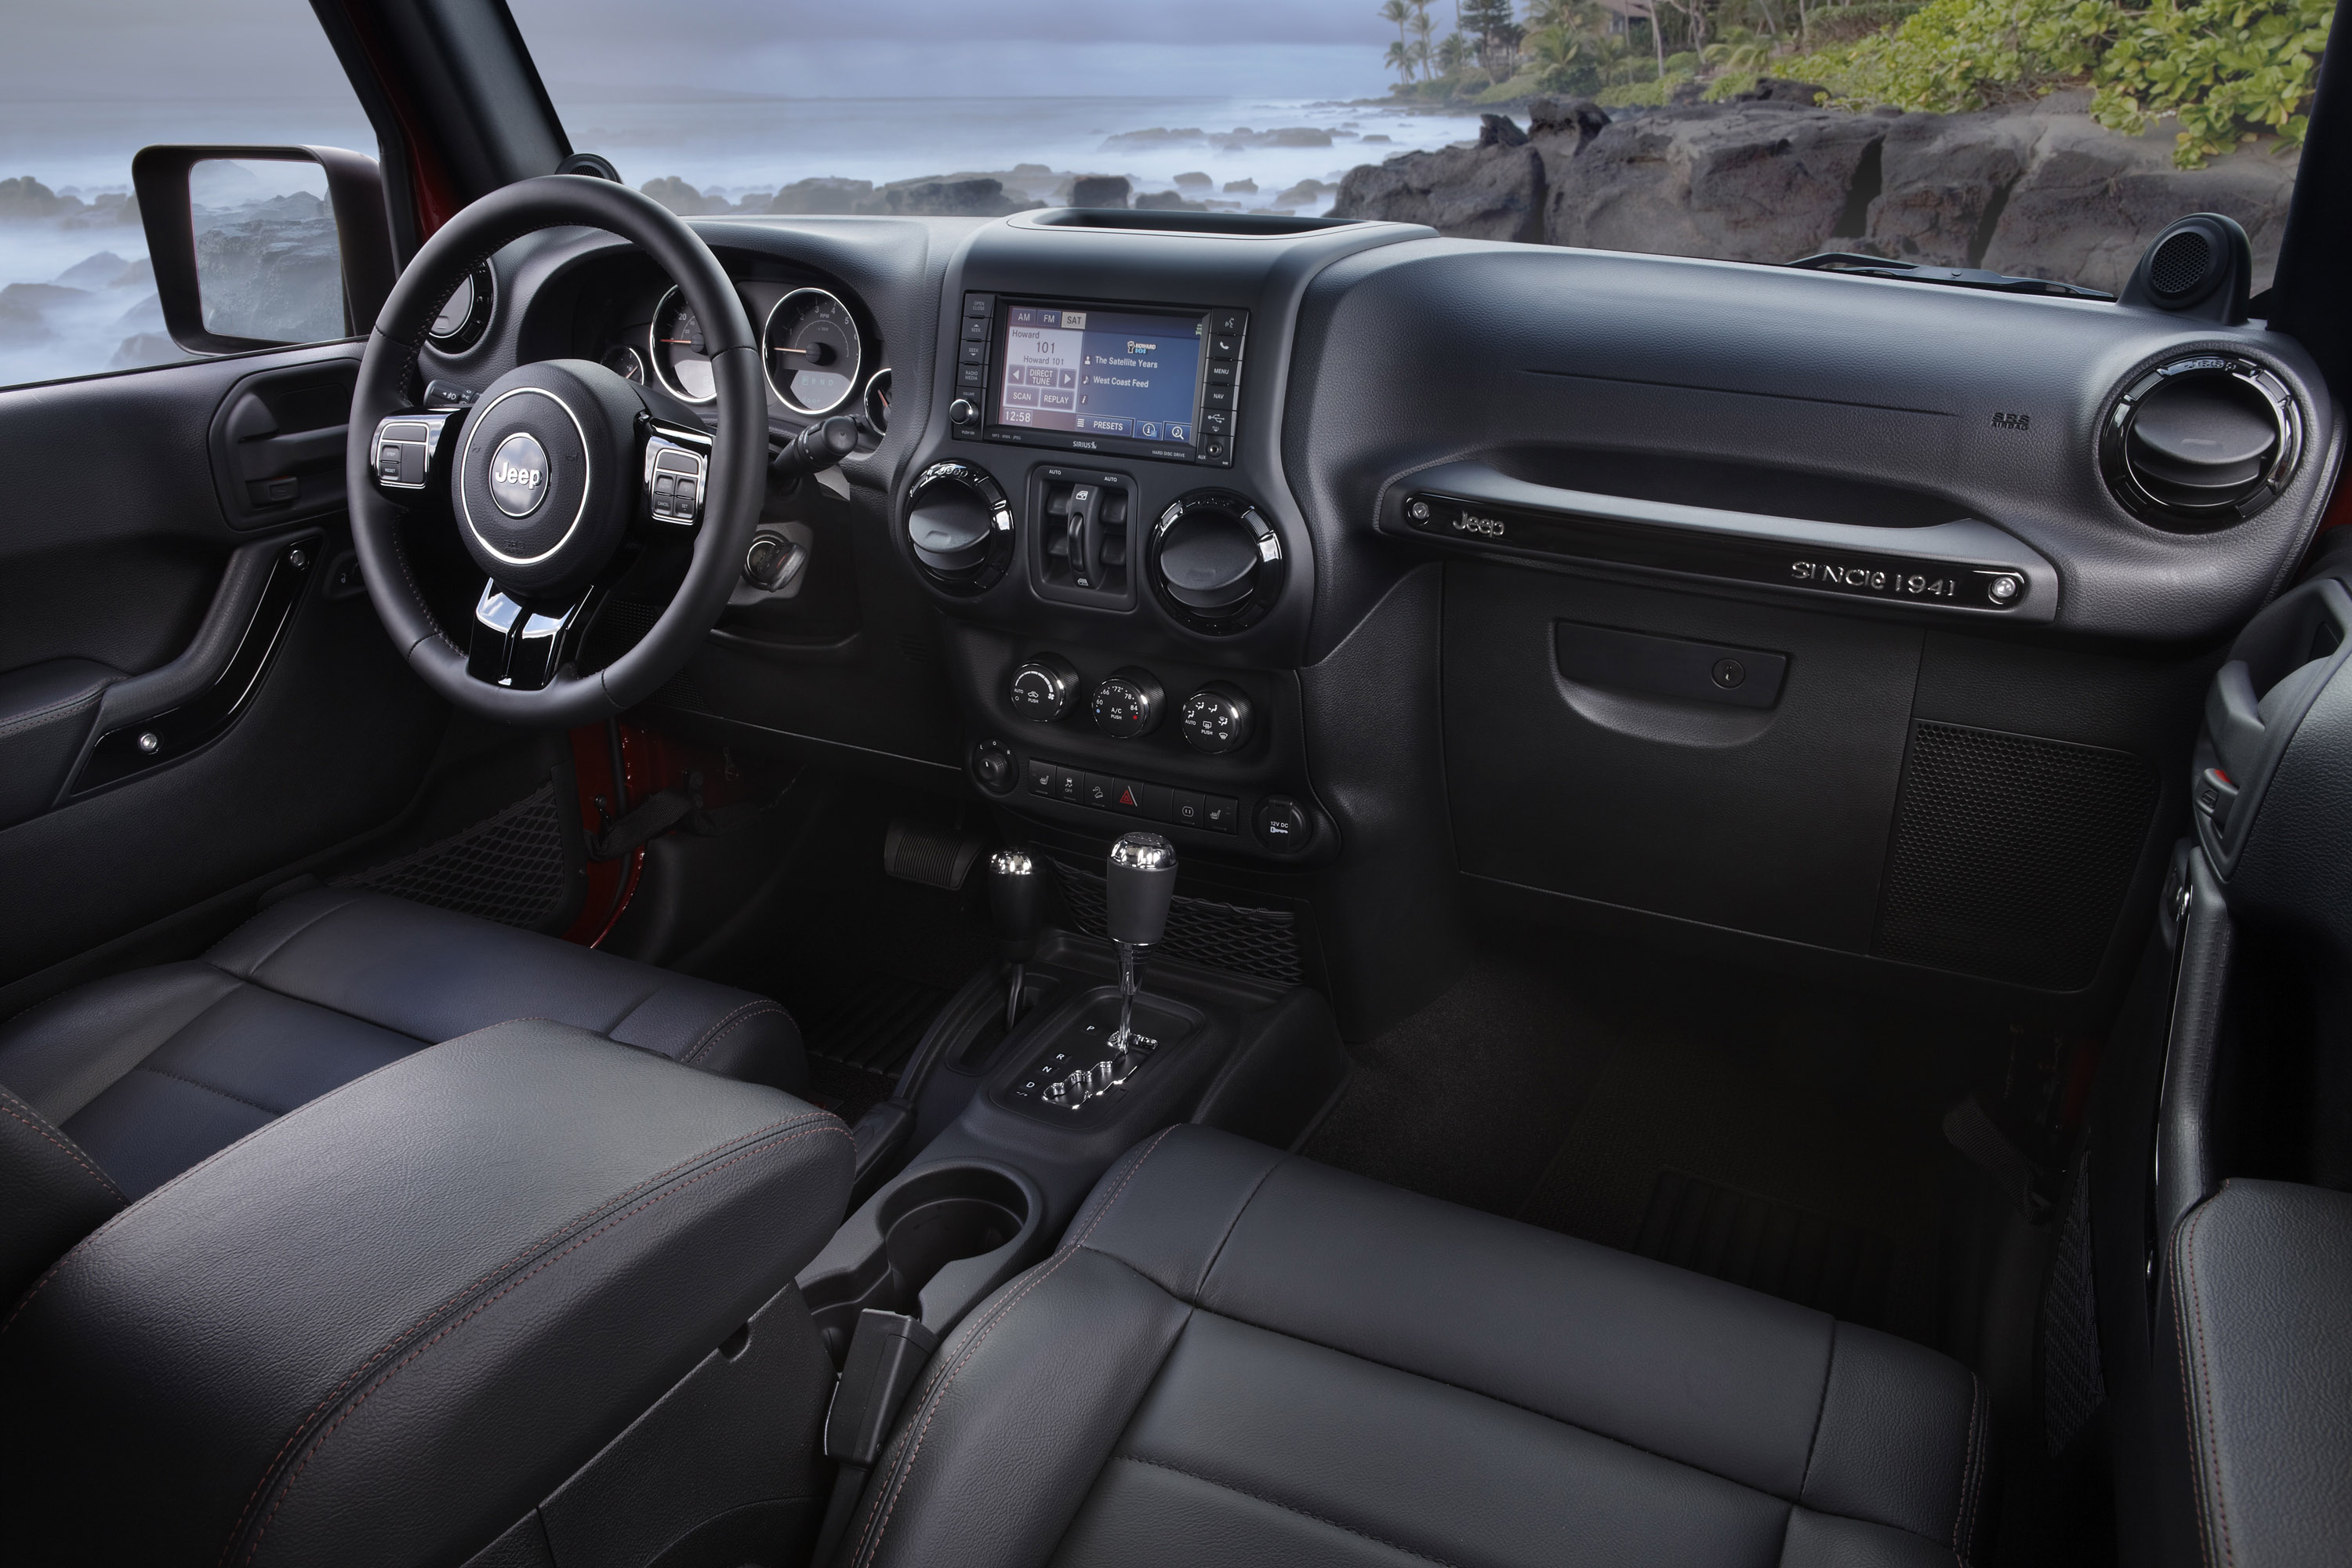 2012 Jeep Wrangler Unlimited Altitude: the new limited-edition model from  Jeep